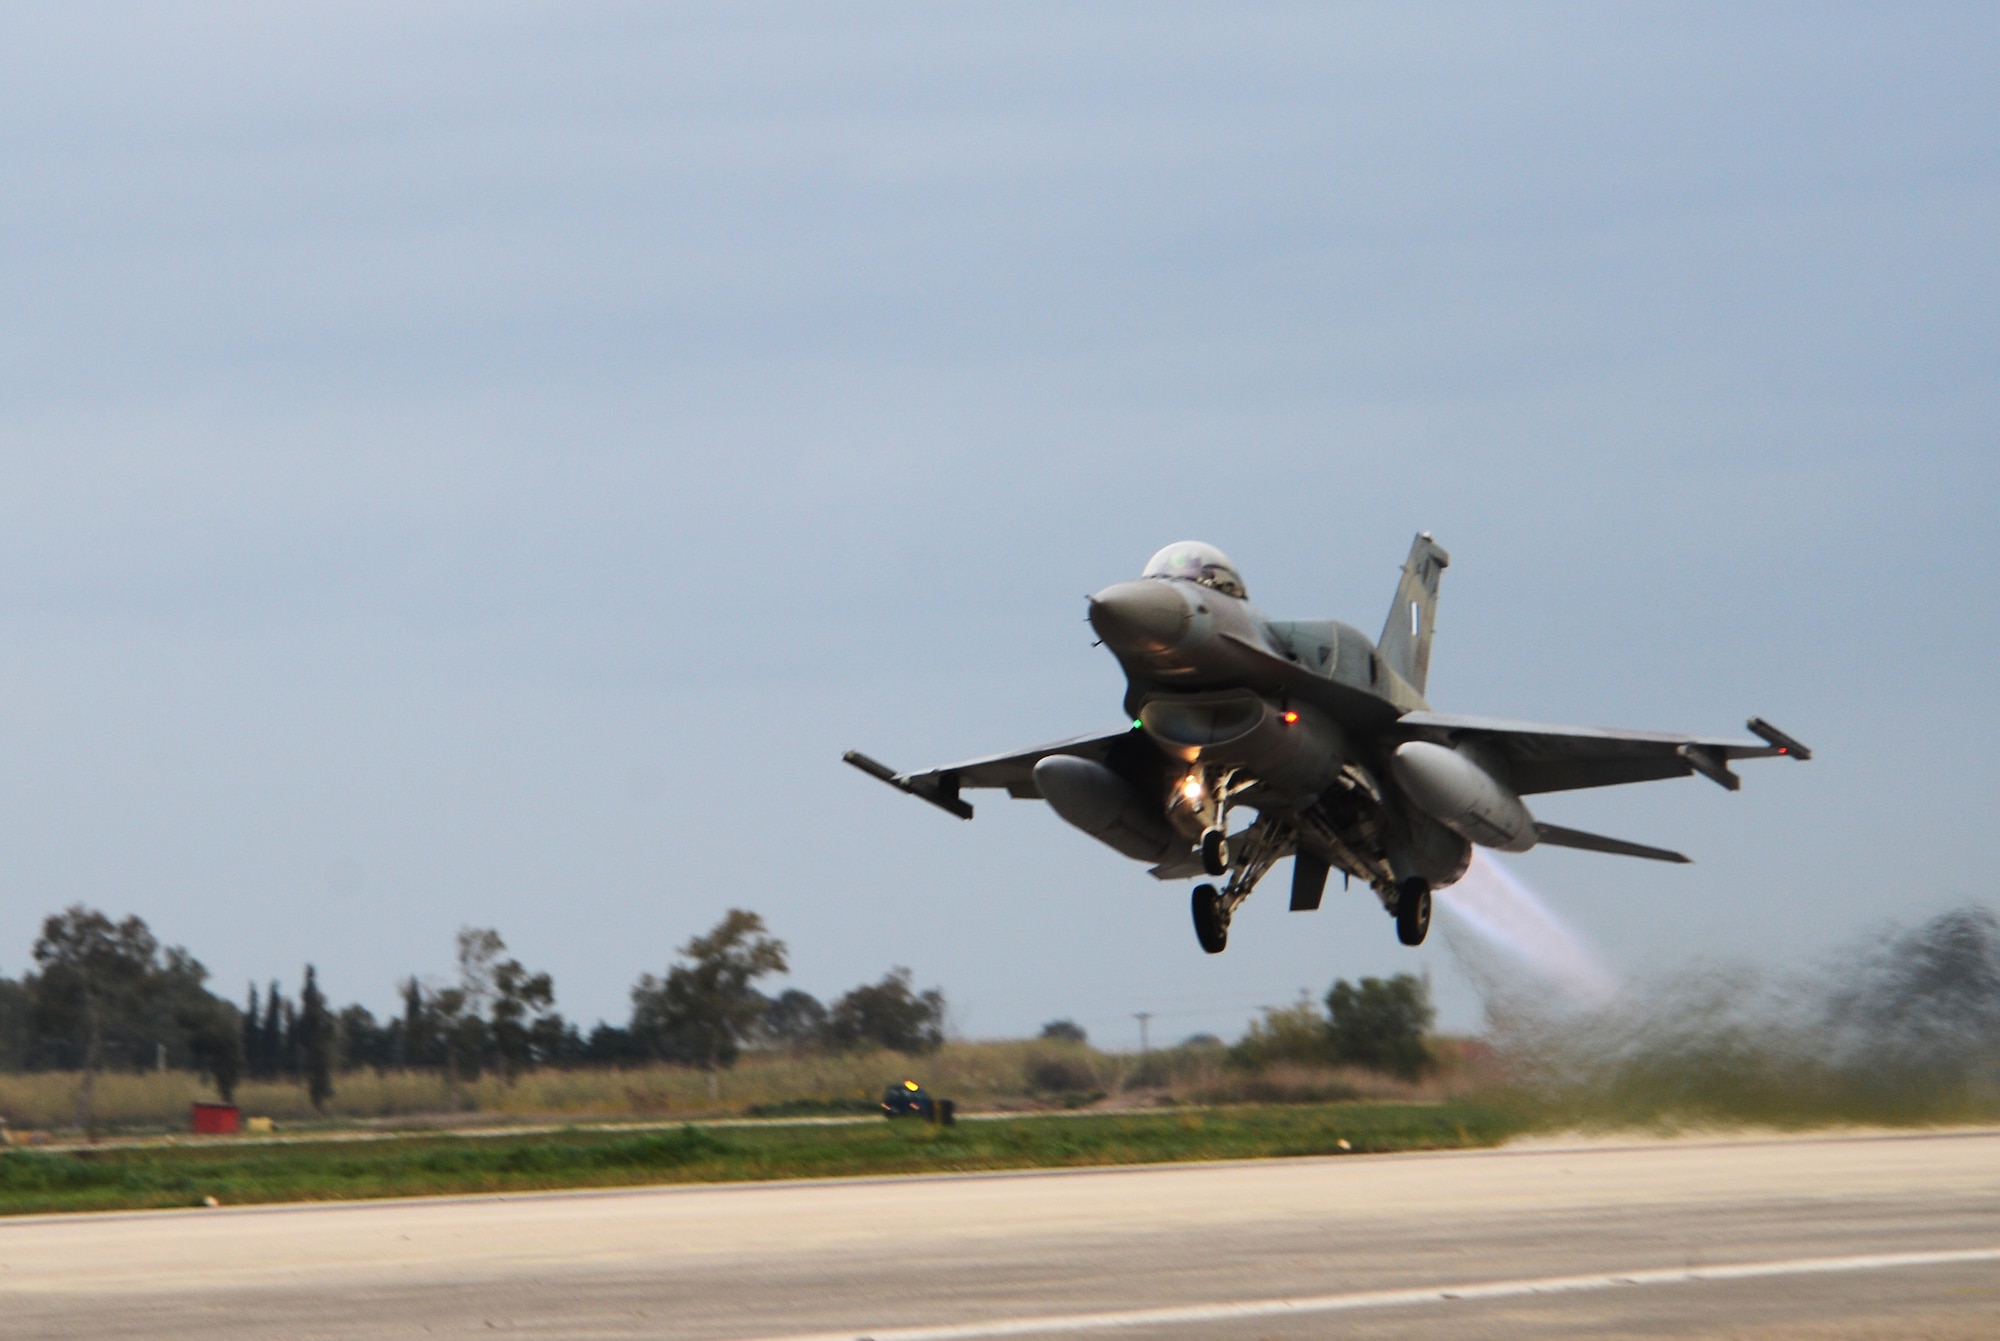 An F-16 Fighting Falcon assigned to the Hellenic Air Forces’ 336th Squadron takes off from Andravida Air Base, Greece, March 21, 2018, during exercise INIOHOS 18. The 336th Squadron are training with the 492nd Fighter Squadron, Royal Air Force Lakenheath, England and other partners and Allies during the exercise to increase interoperability and strengthen partnerships. (U.S. Air Force photo/1st Lt. Elias Small)